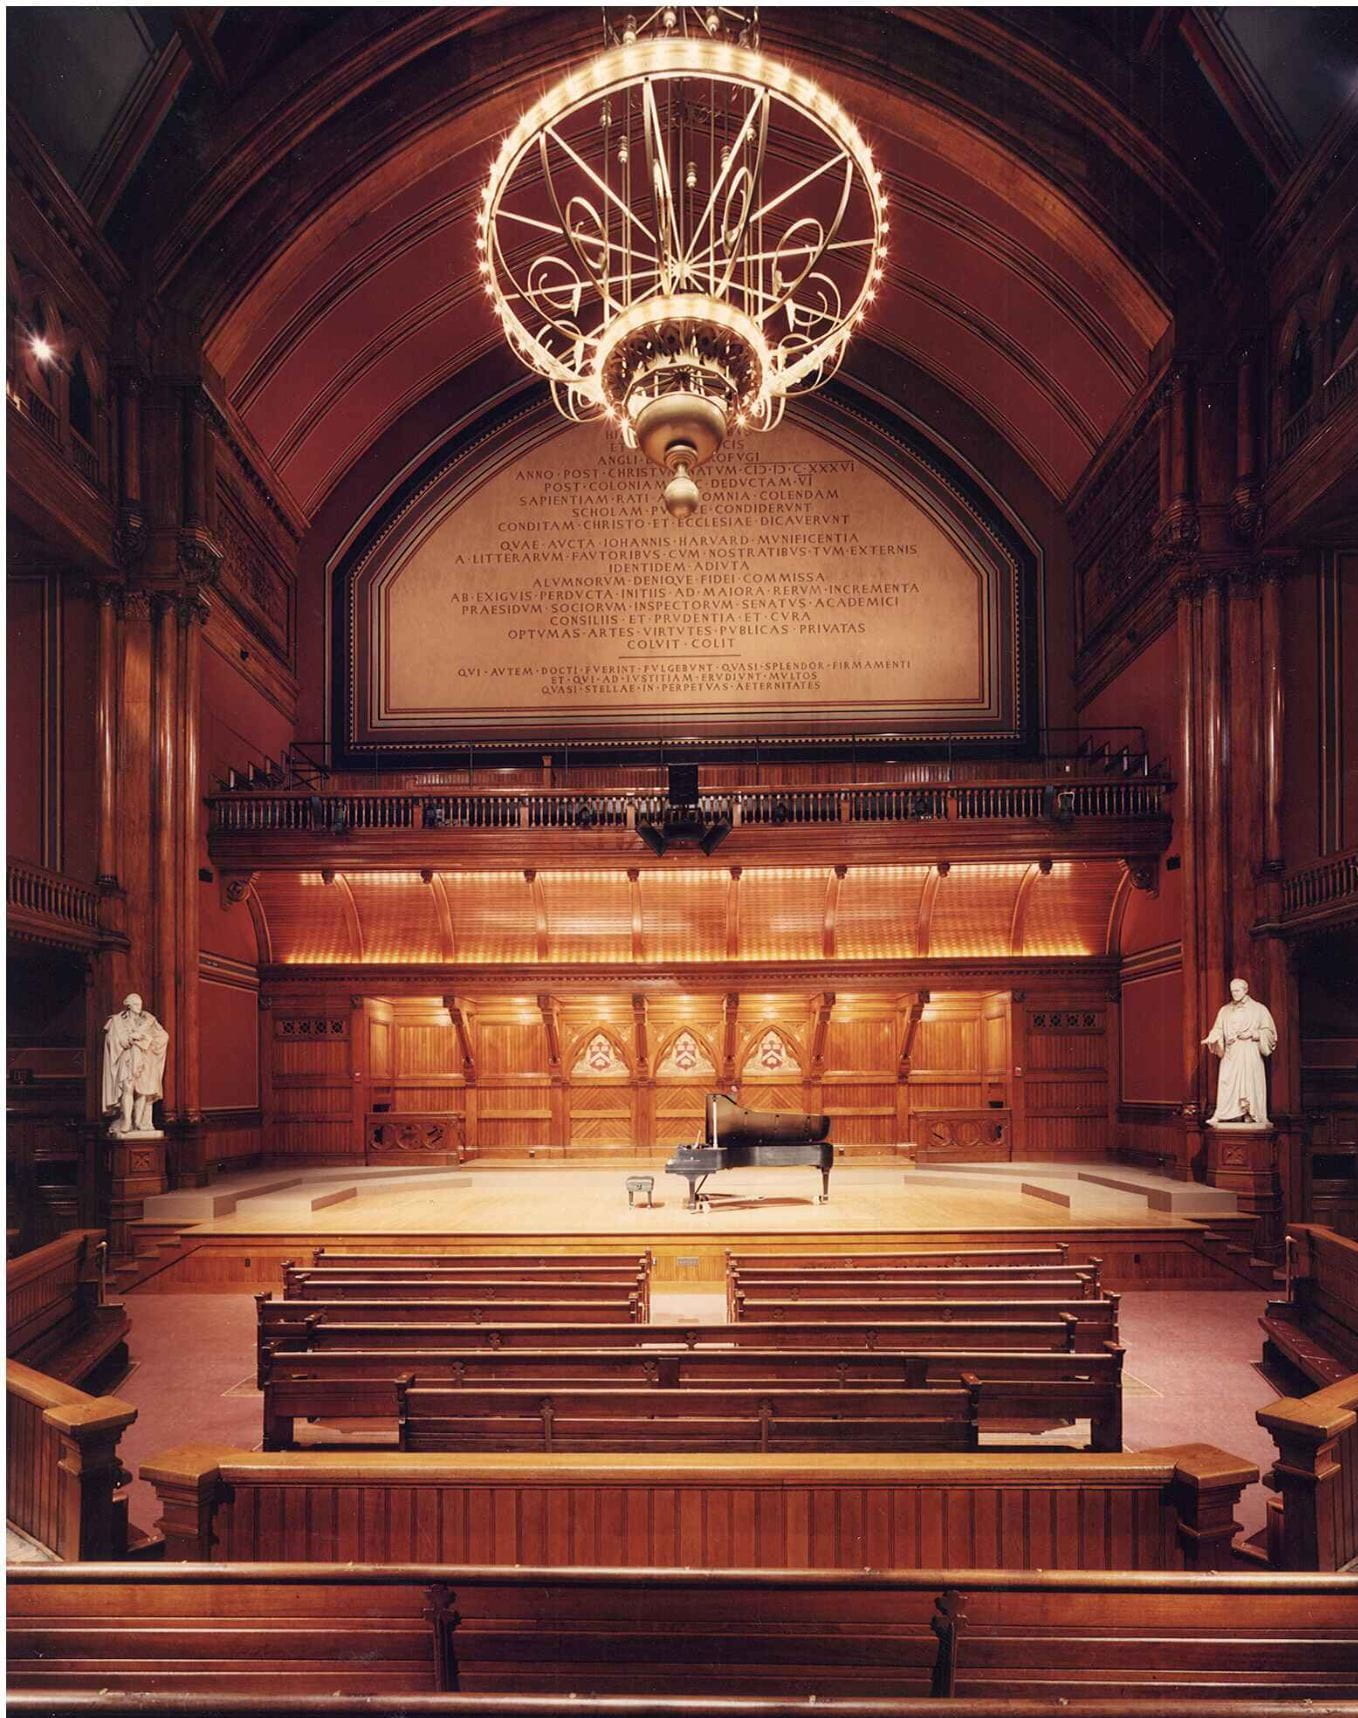 A view of Sanders Theatre's stage from the center audience perspective. A large chandelier hangs over piano centered on the stage area